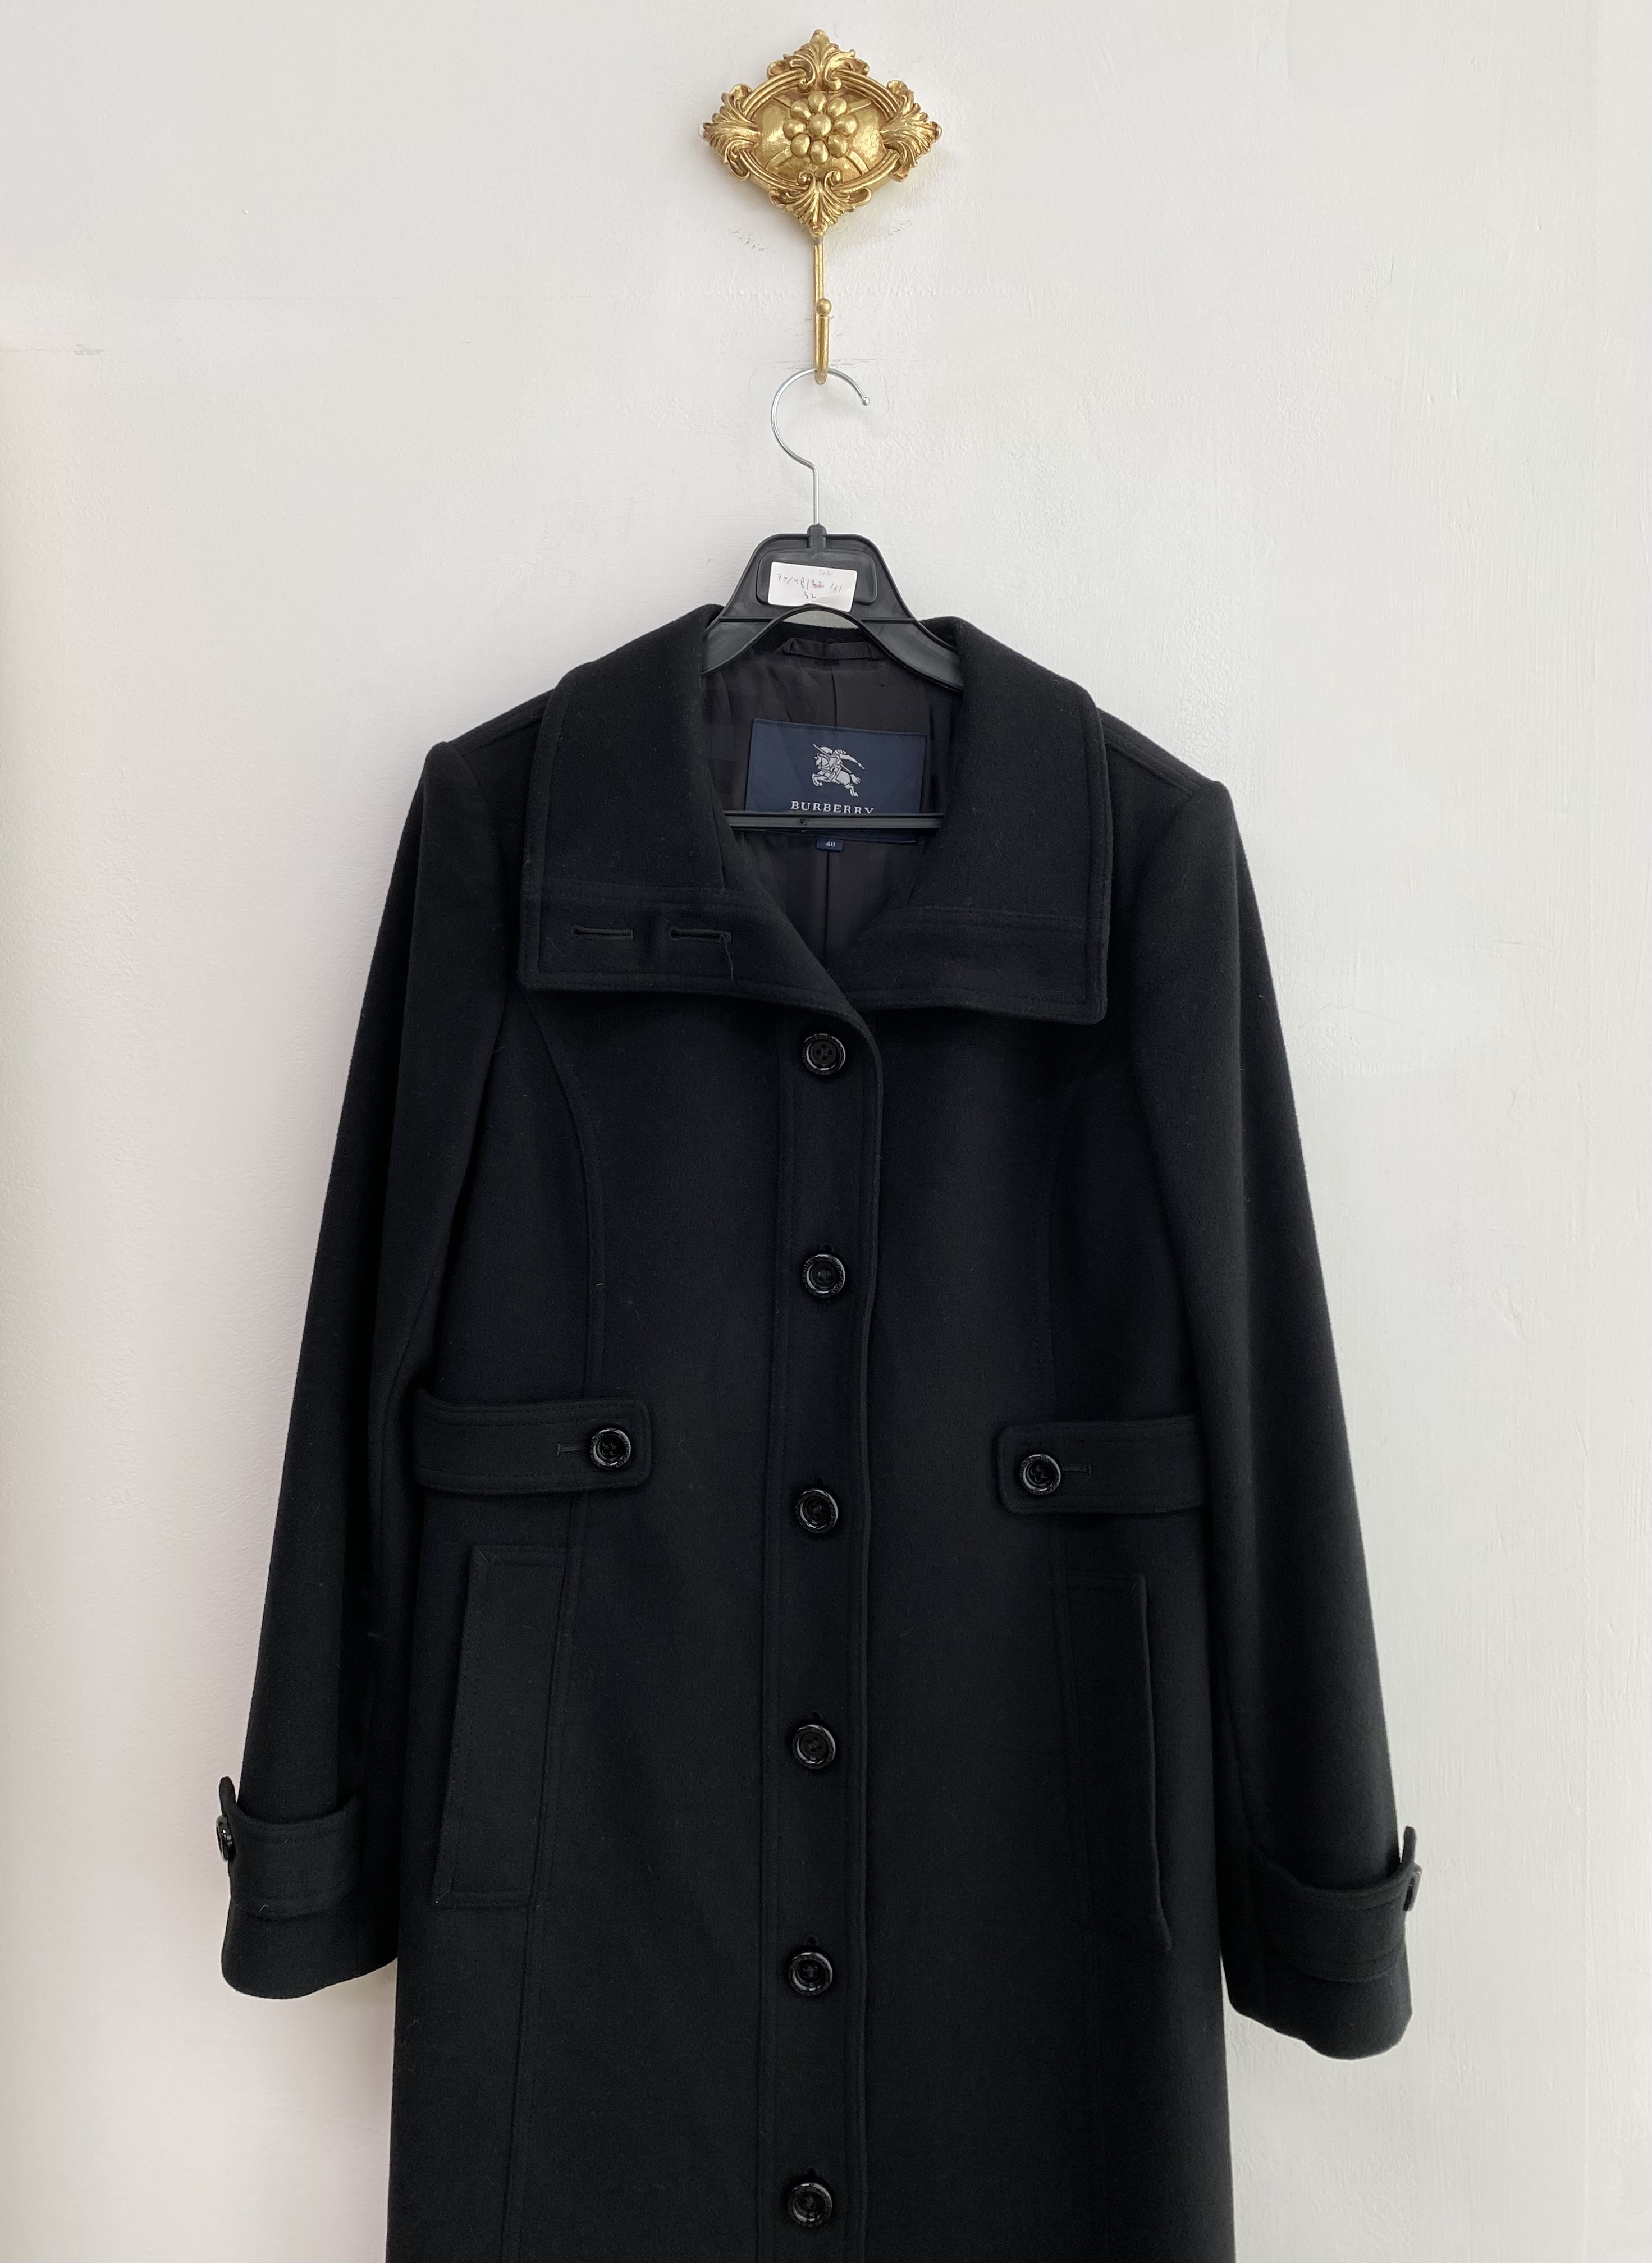 BURBERRY black formal straight wool cashmere coat